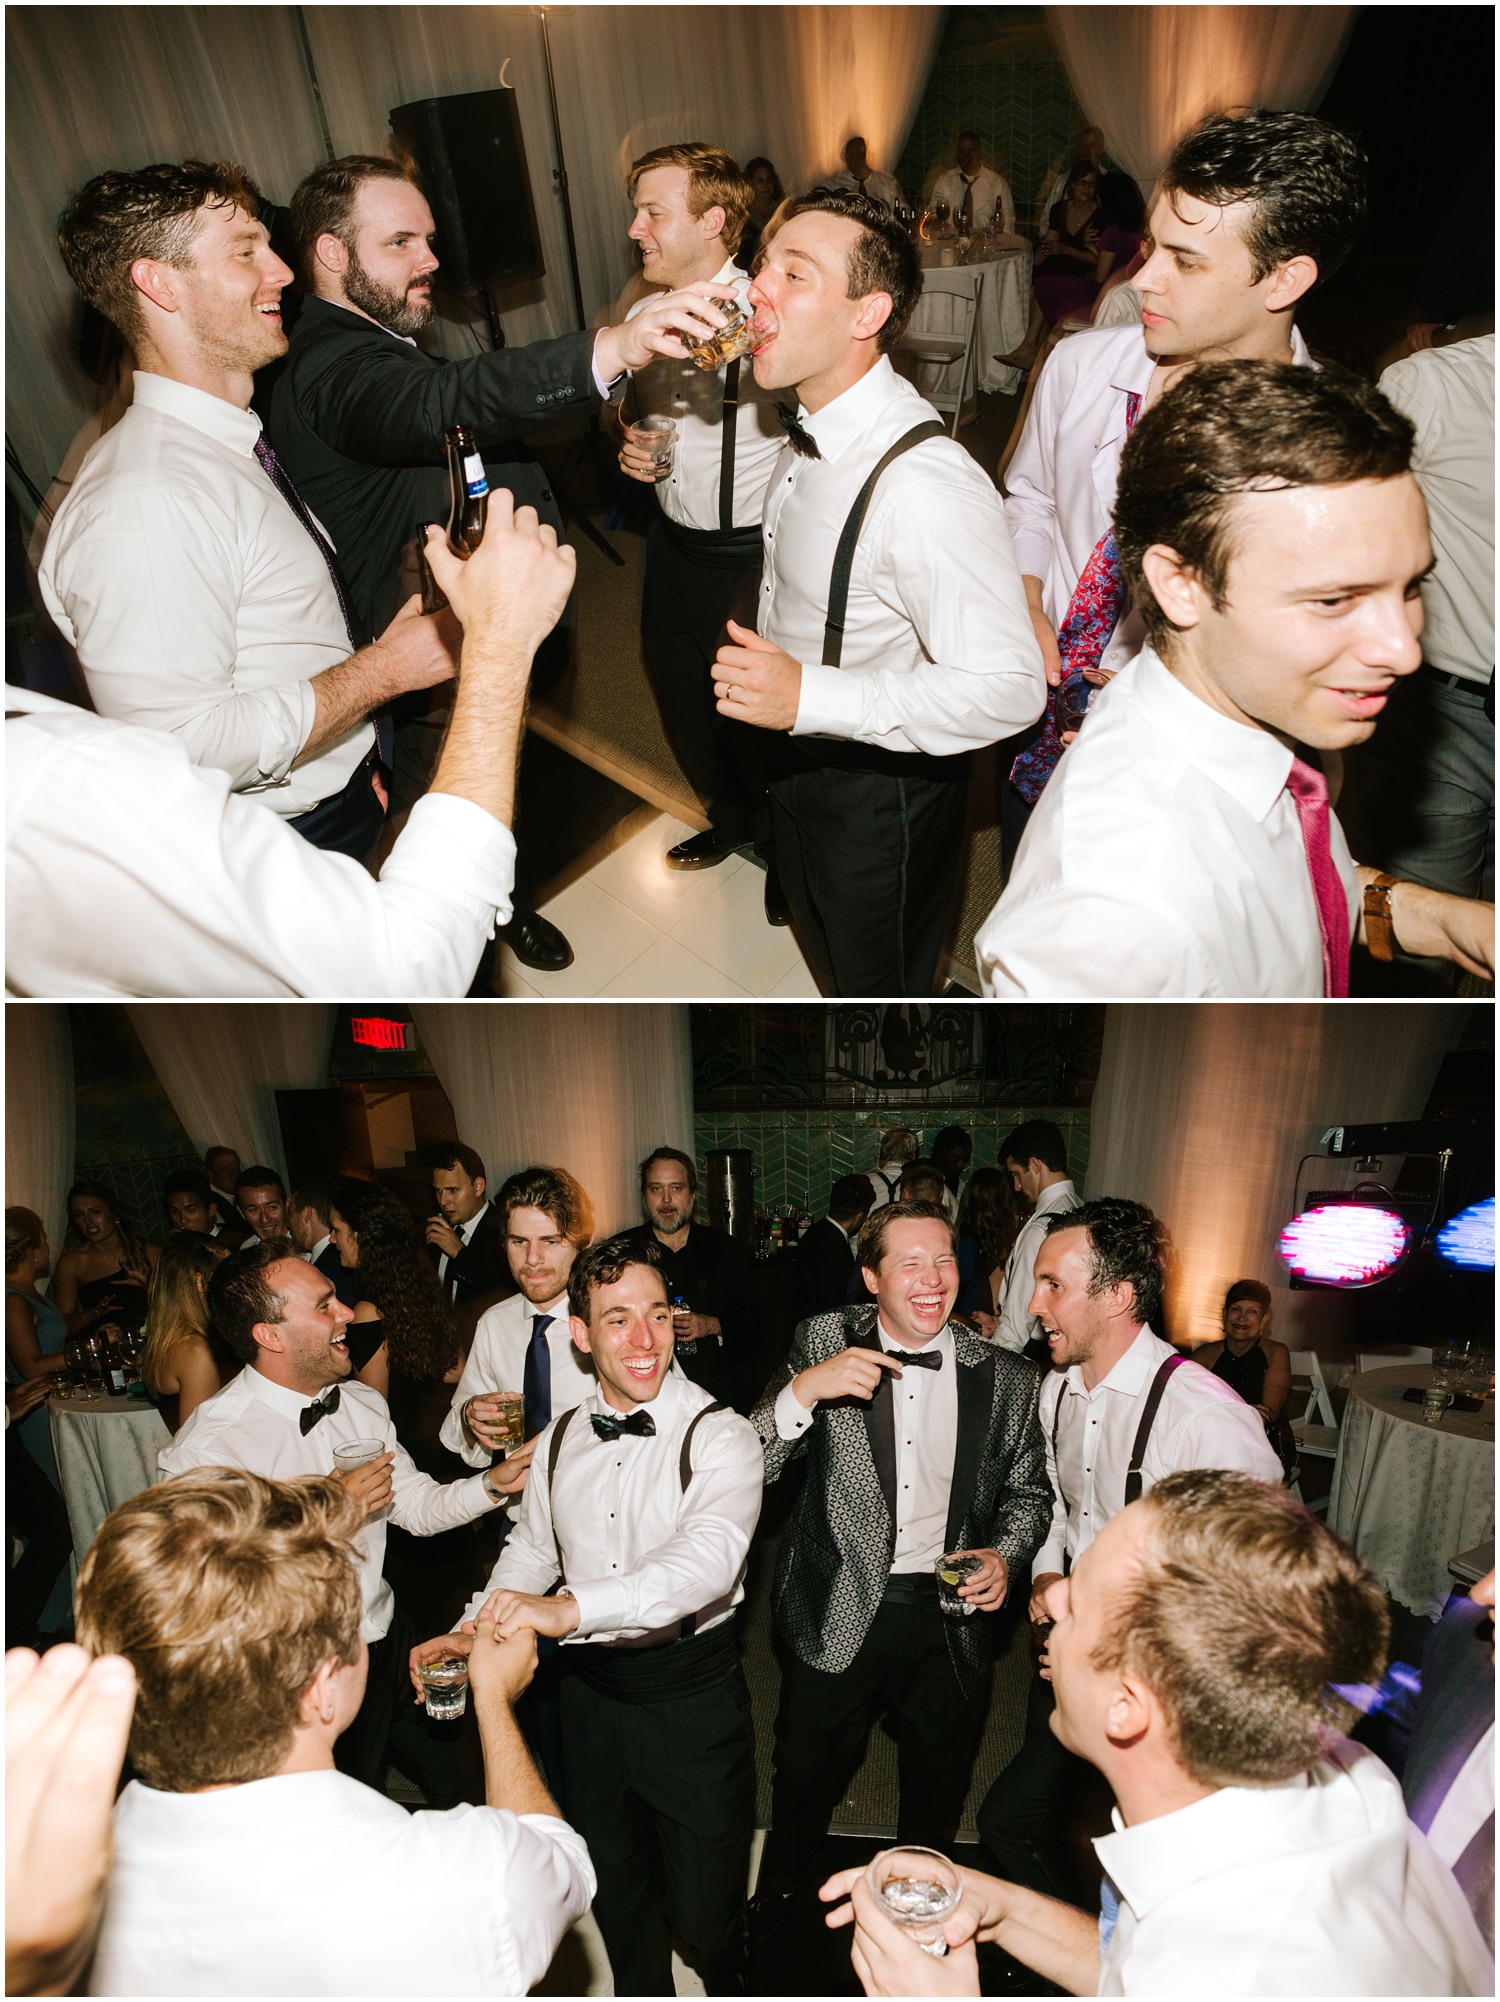 groomsmen give groom drinks and dance at Graylyn Estate wedding reception